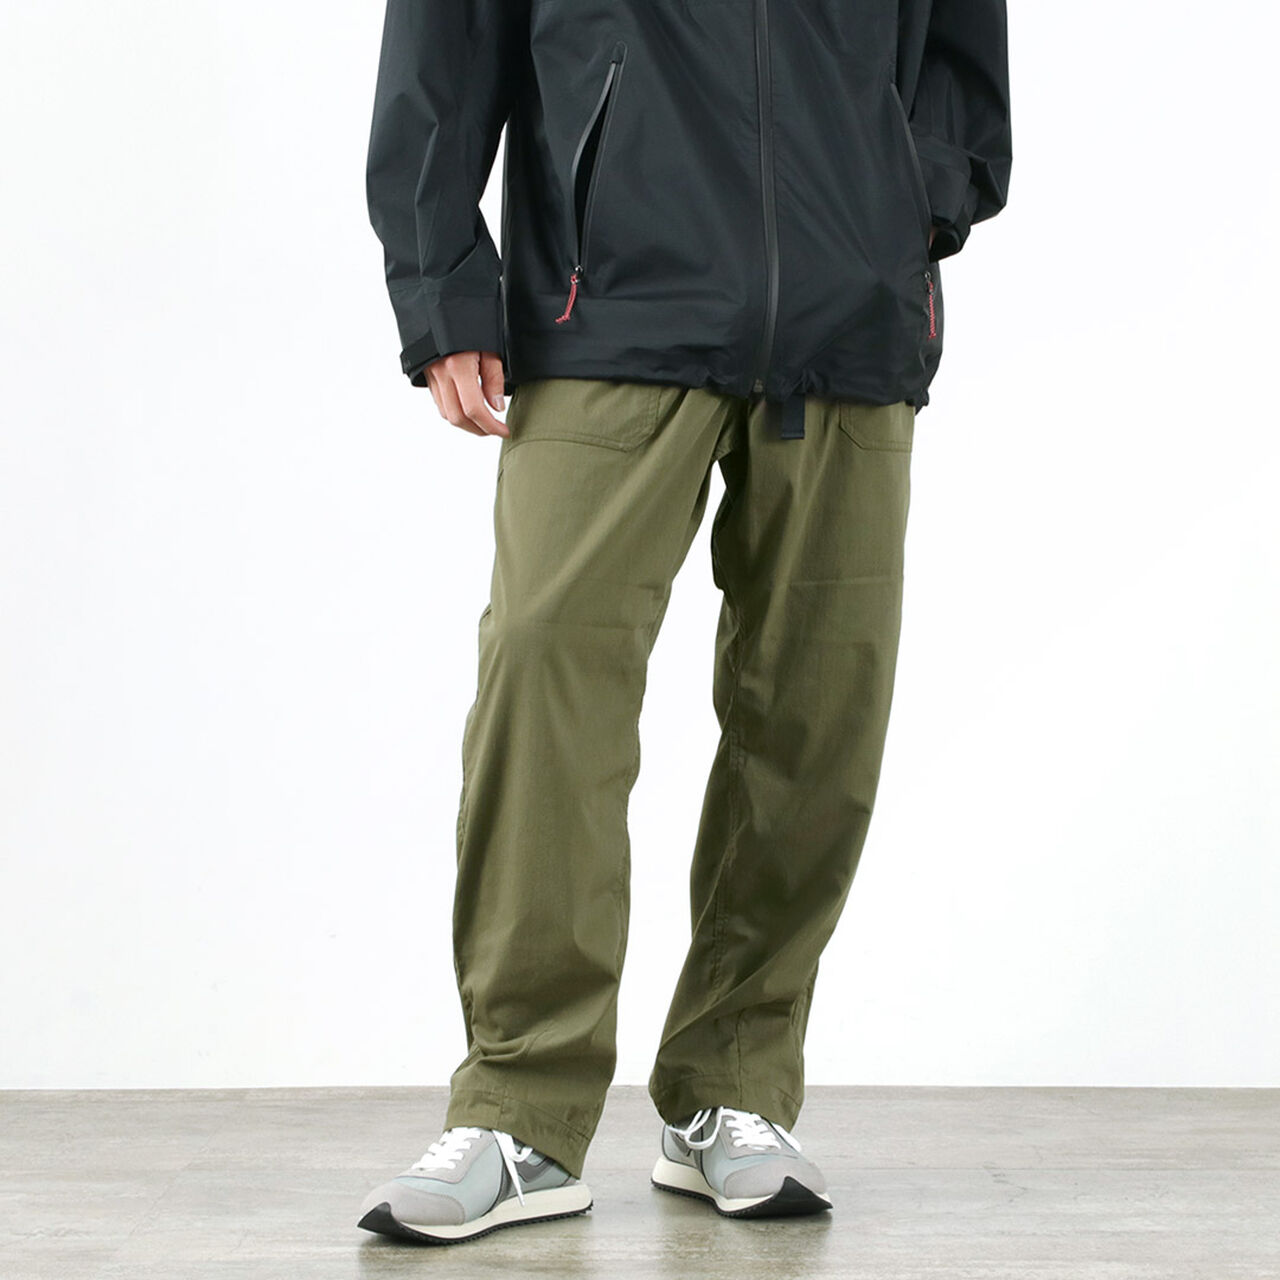 HINOC RIPSTOP FIELD PANTS,ArmyGreen, large image number 0